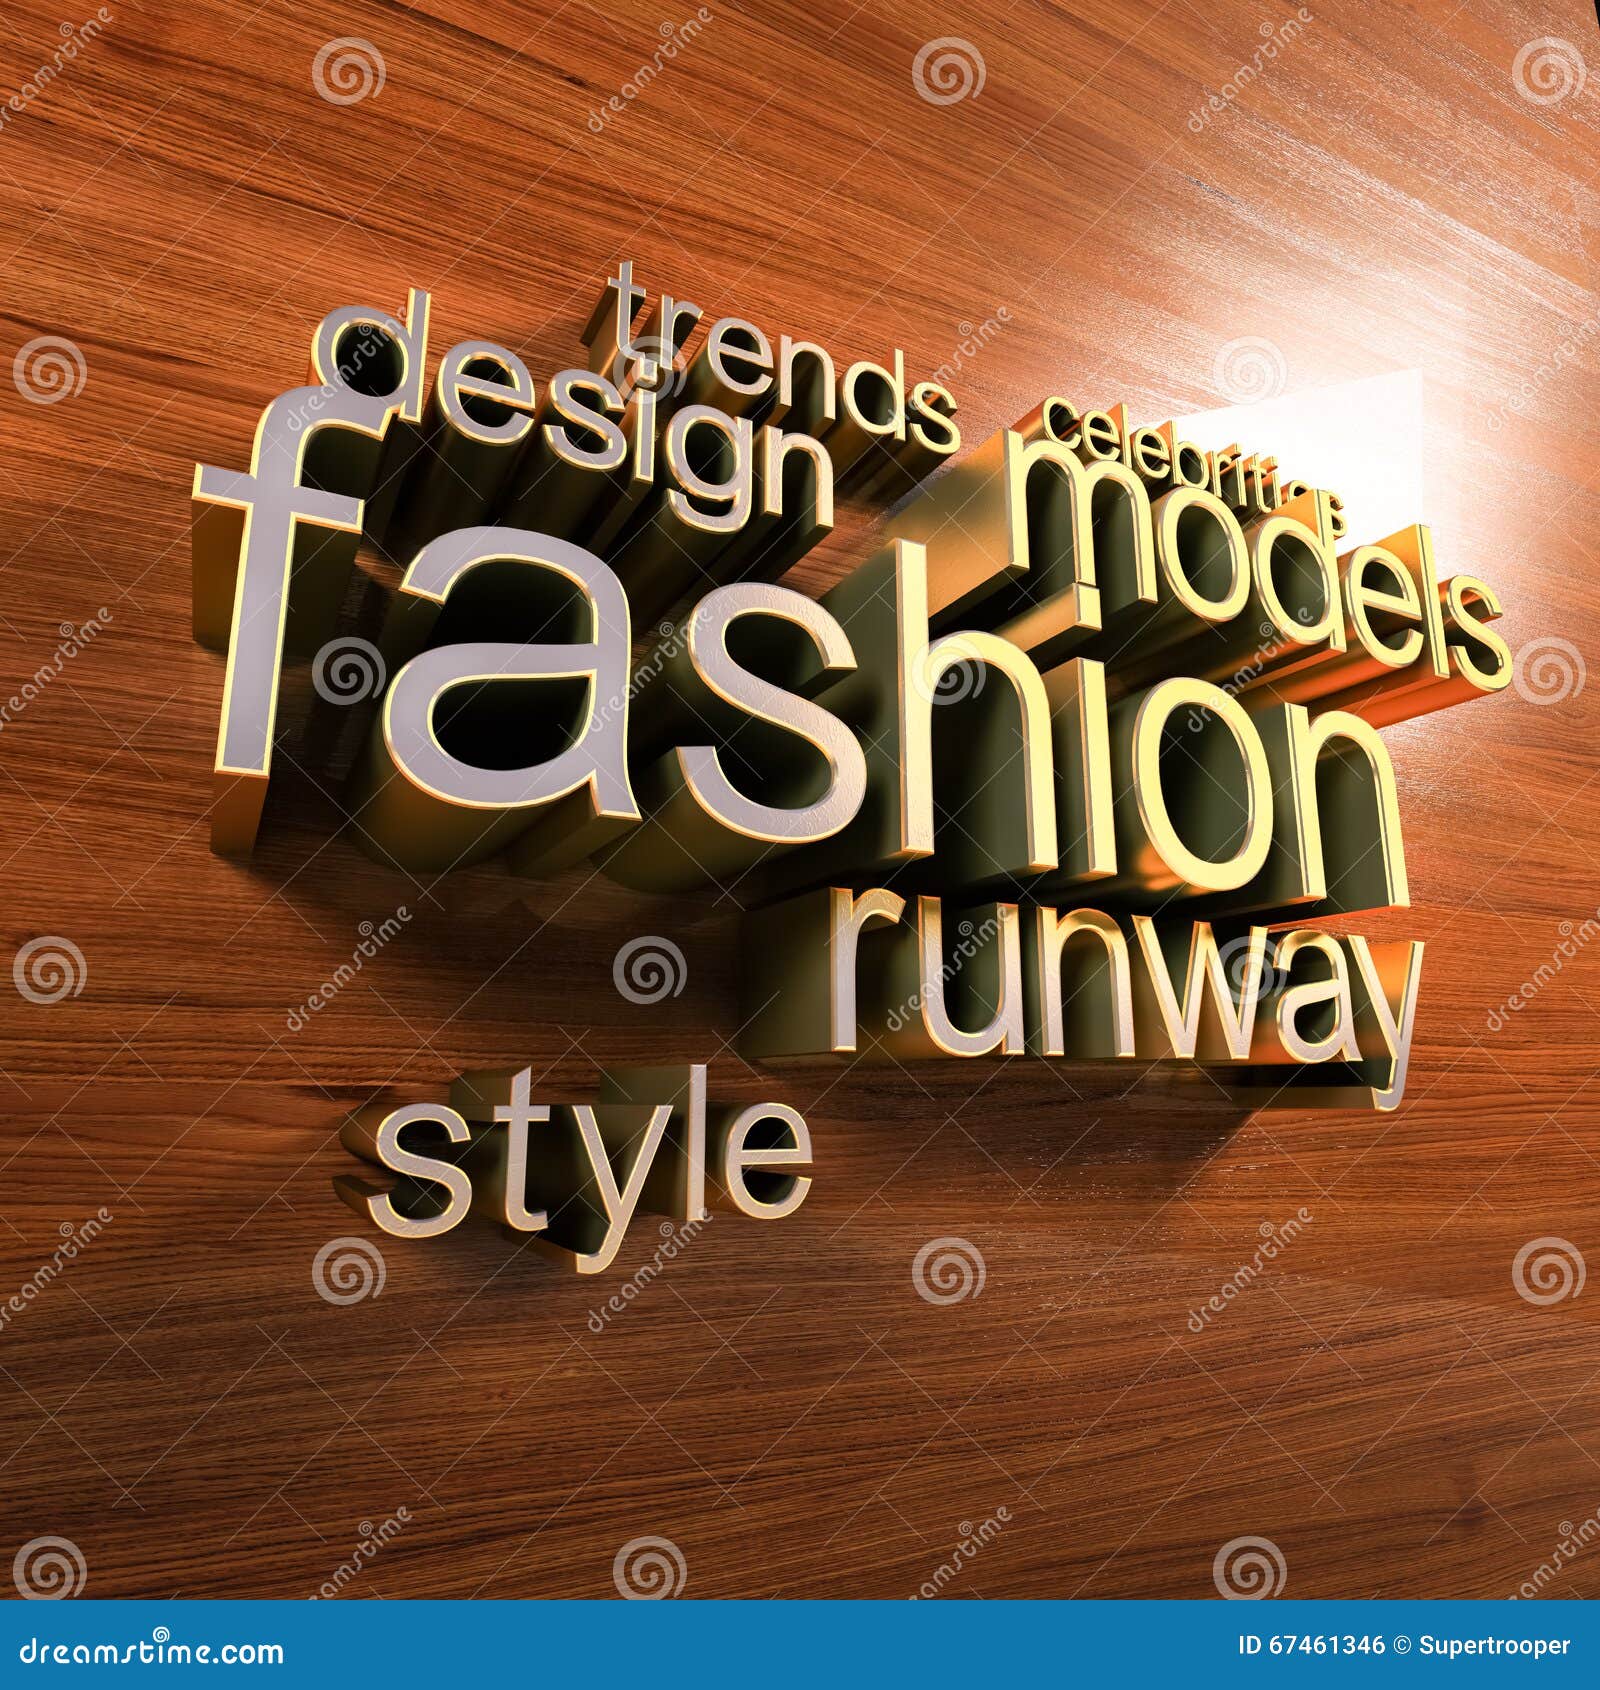 Fashion words cloud stock photo. Image of material, design - 67461346